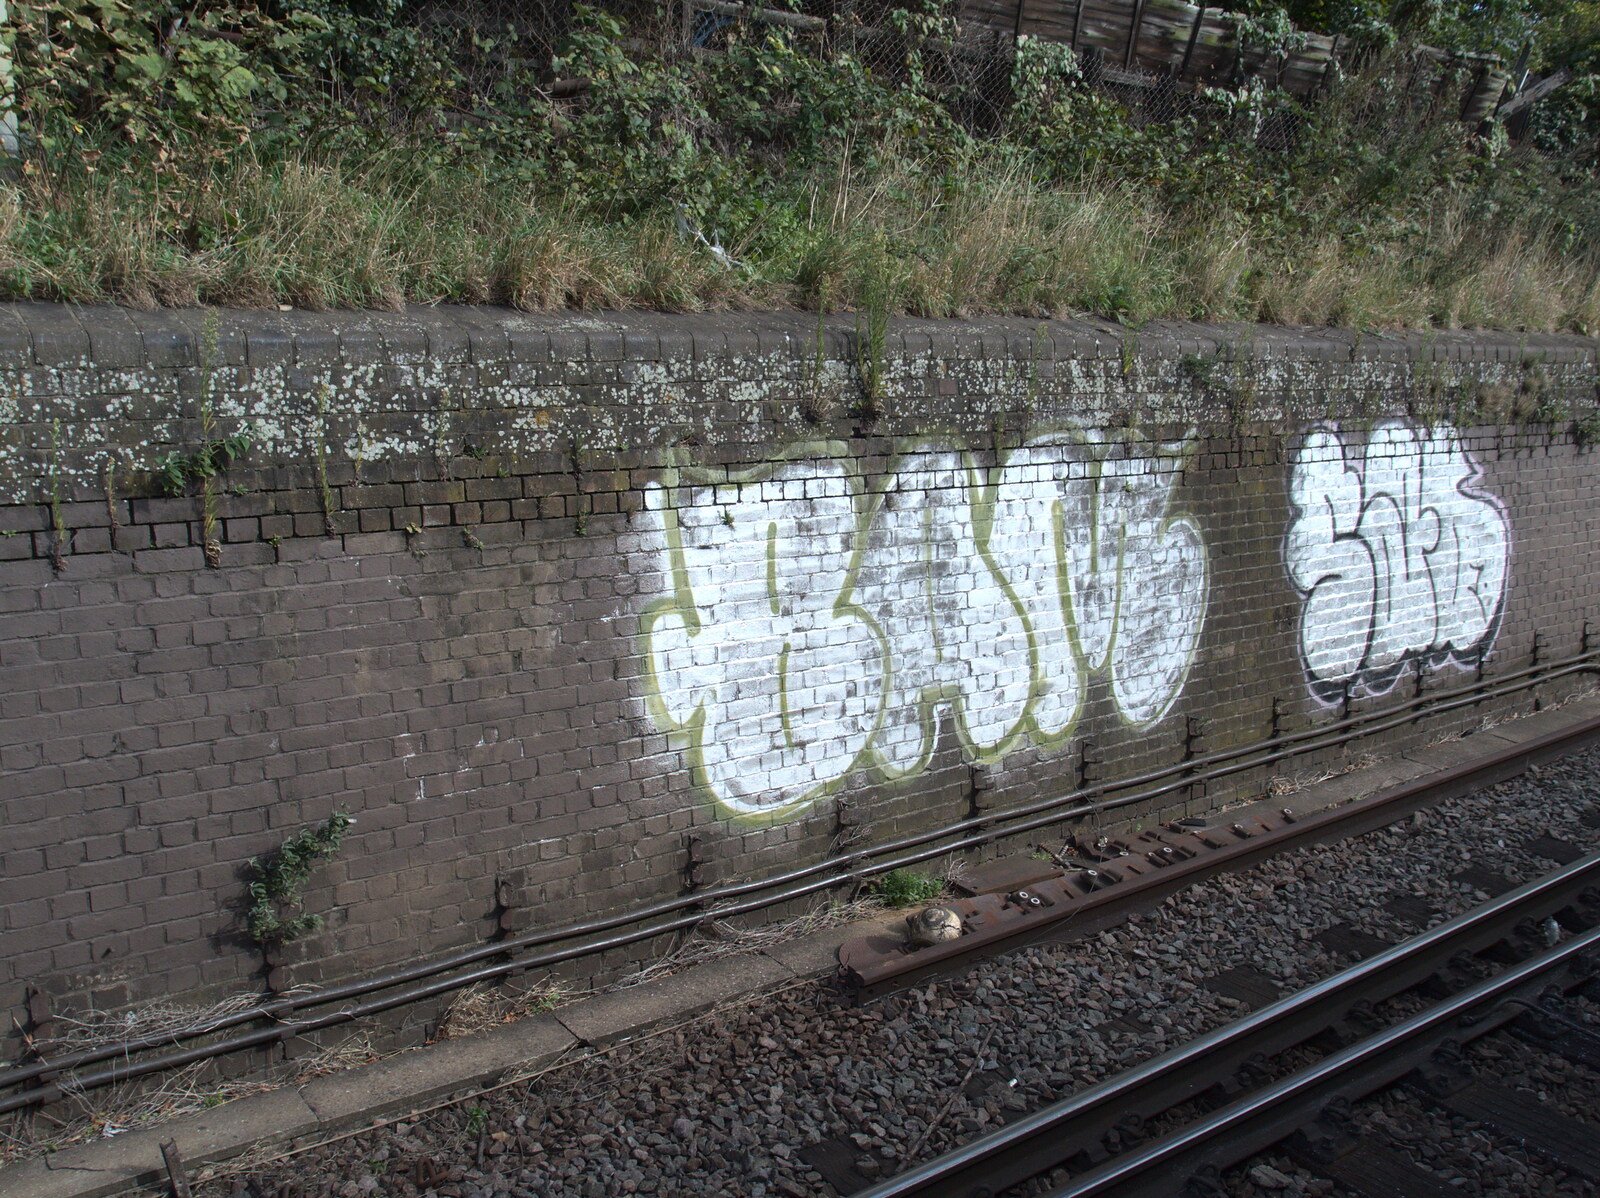 More silver graffiti near Seven Kings from New Railway and a Trip to Ikea, Ipswich and Thurrock - 19th September 2014